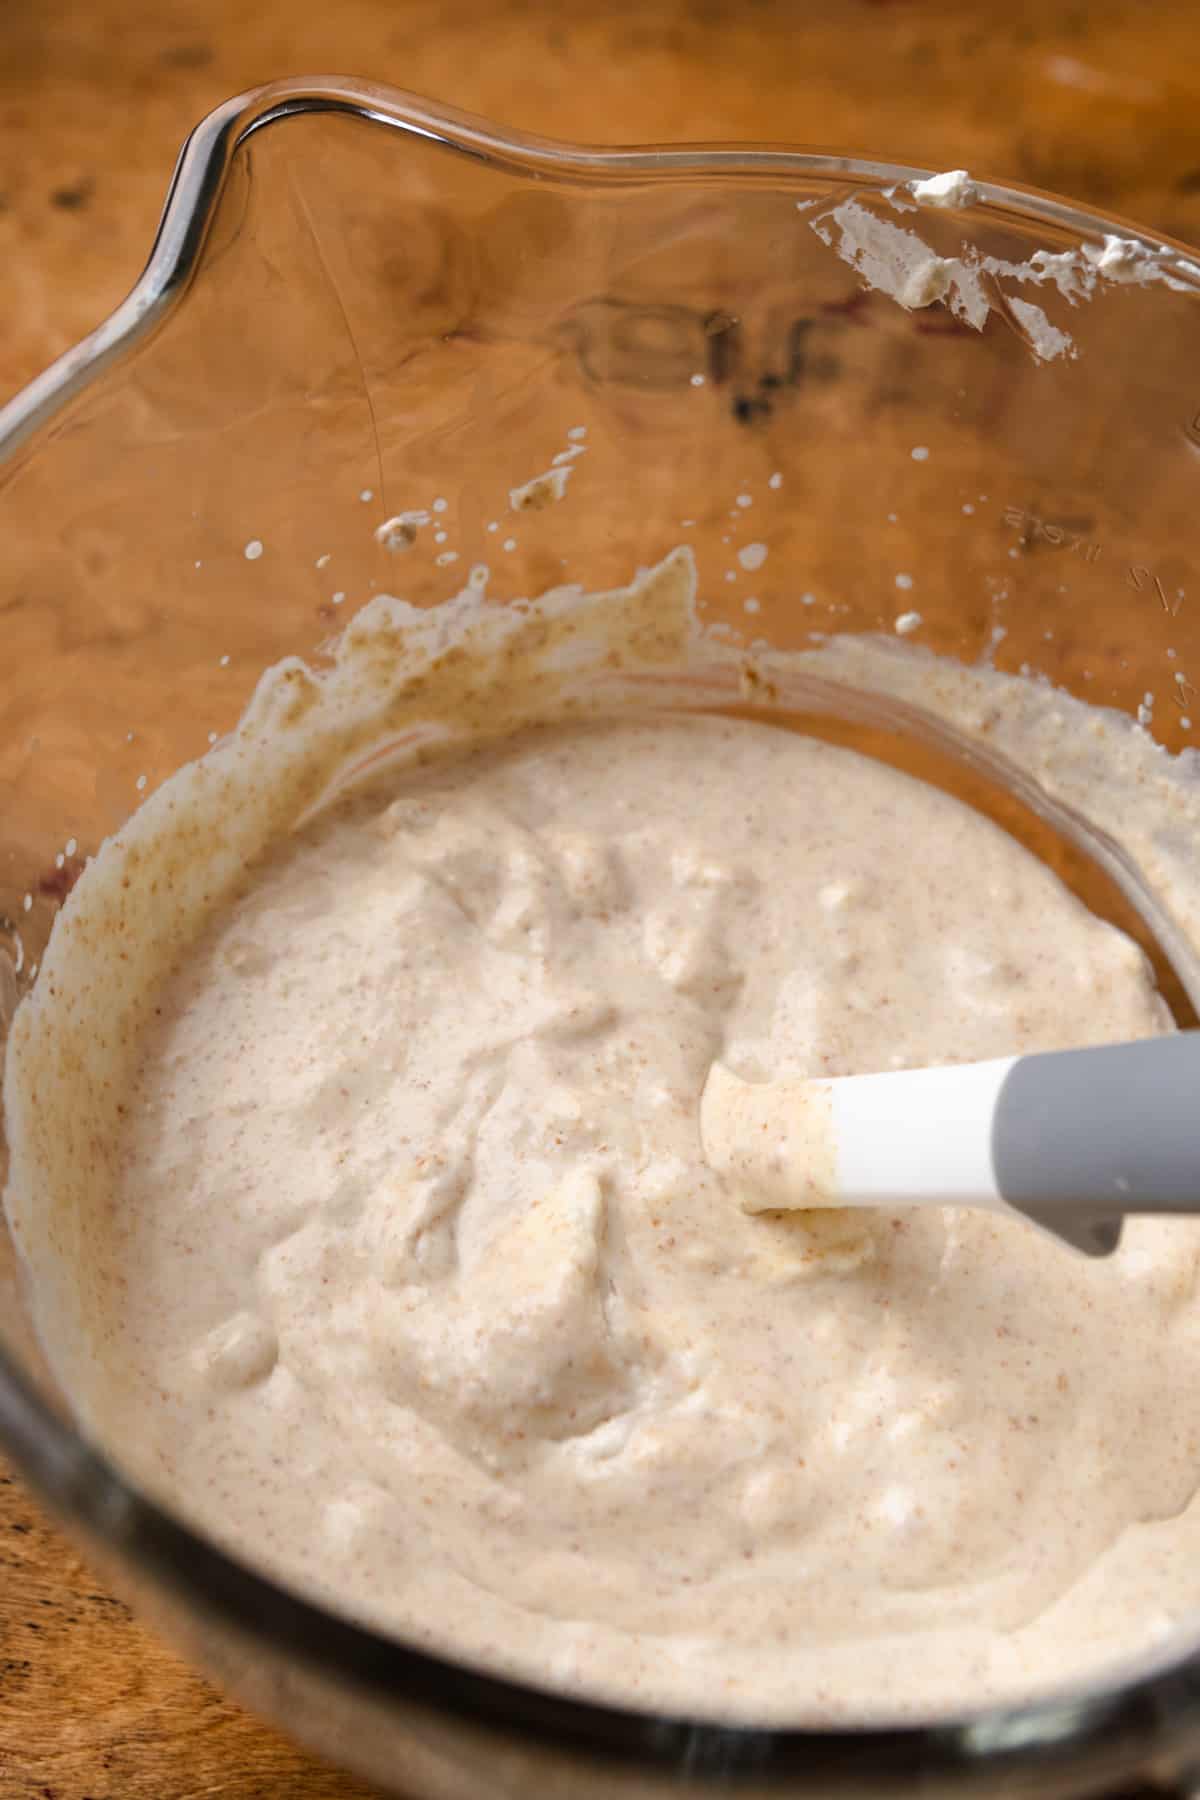 Graham cracker ice cream mixture in a bowl with a rubber spatula.